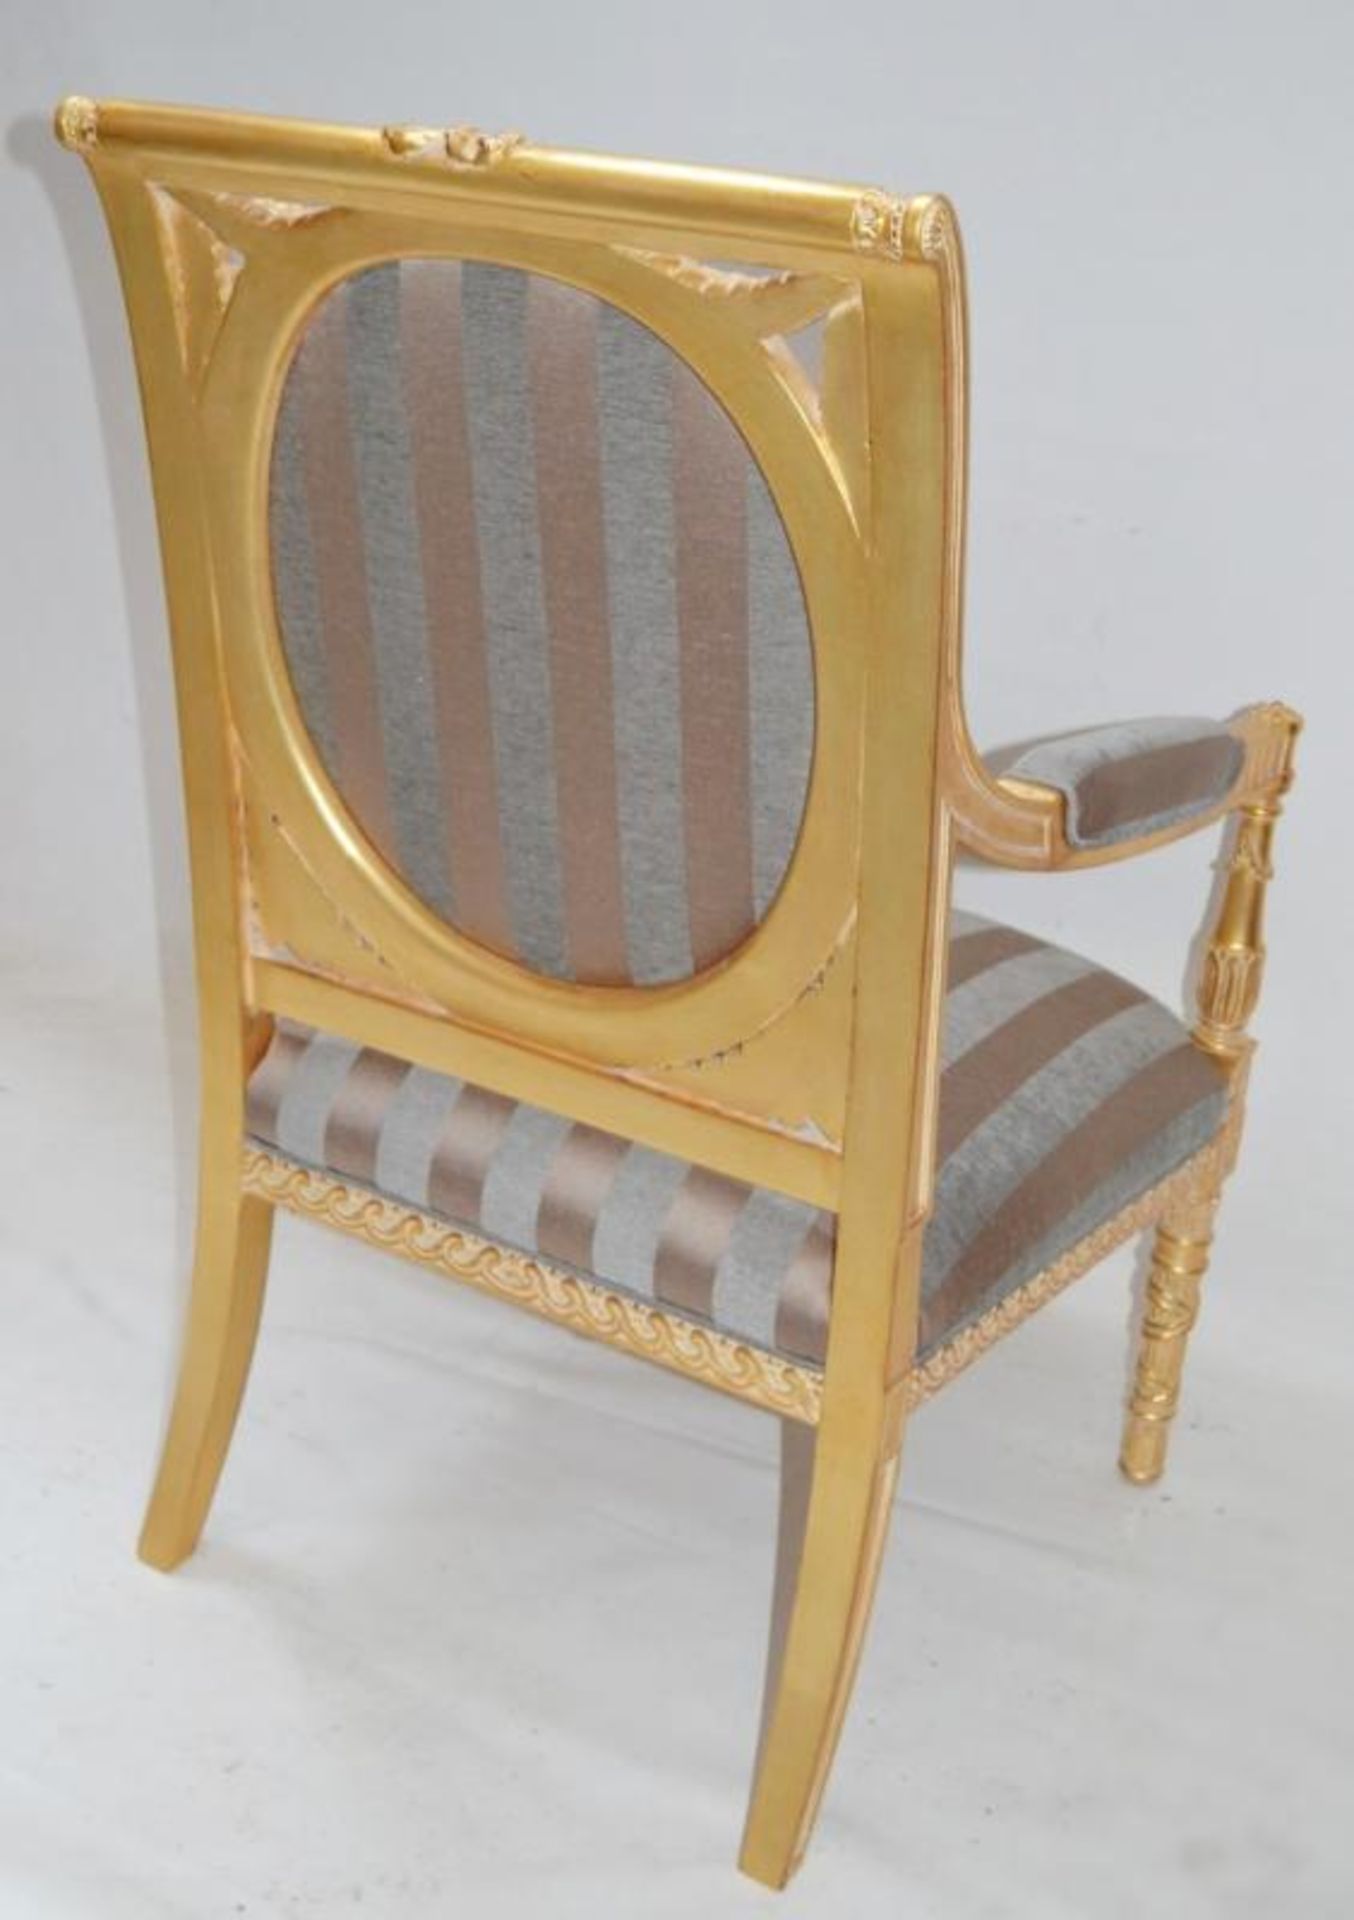 1 x DURESTA Flavia Chair - Features A Hand-Carved Hard Wood Frame With Hand-Stitched Coil Sprung Sea - Bild 13 aus 16